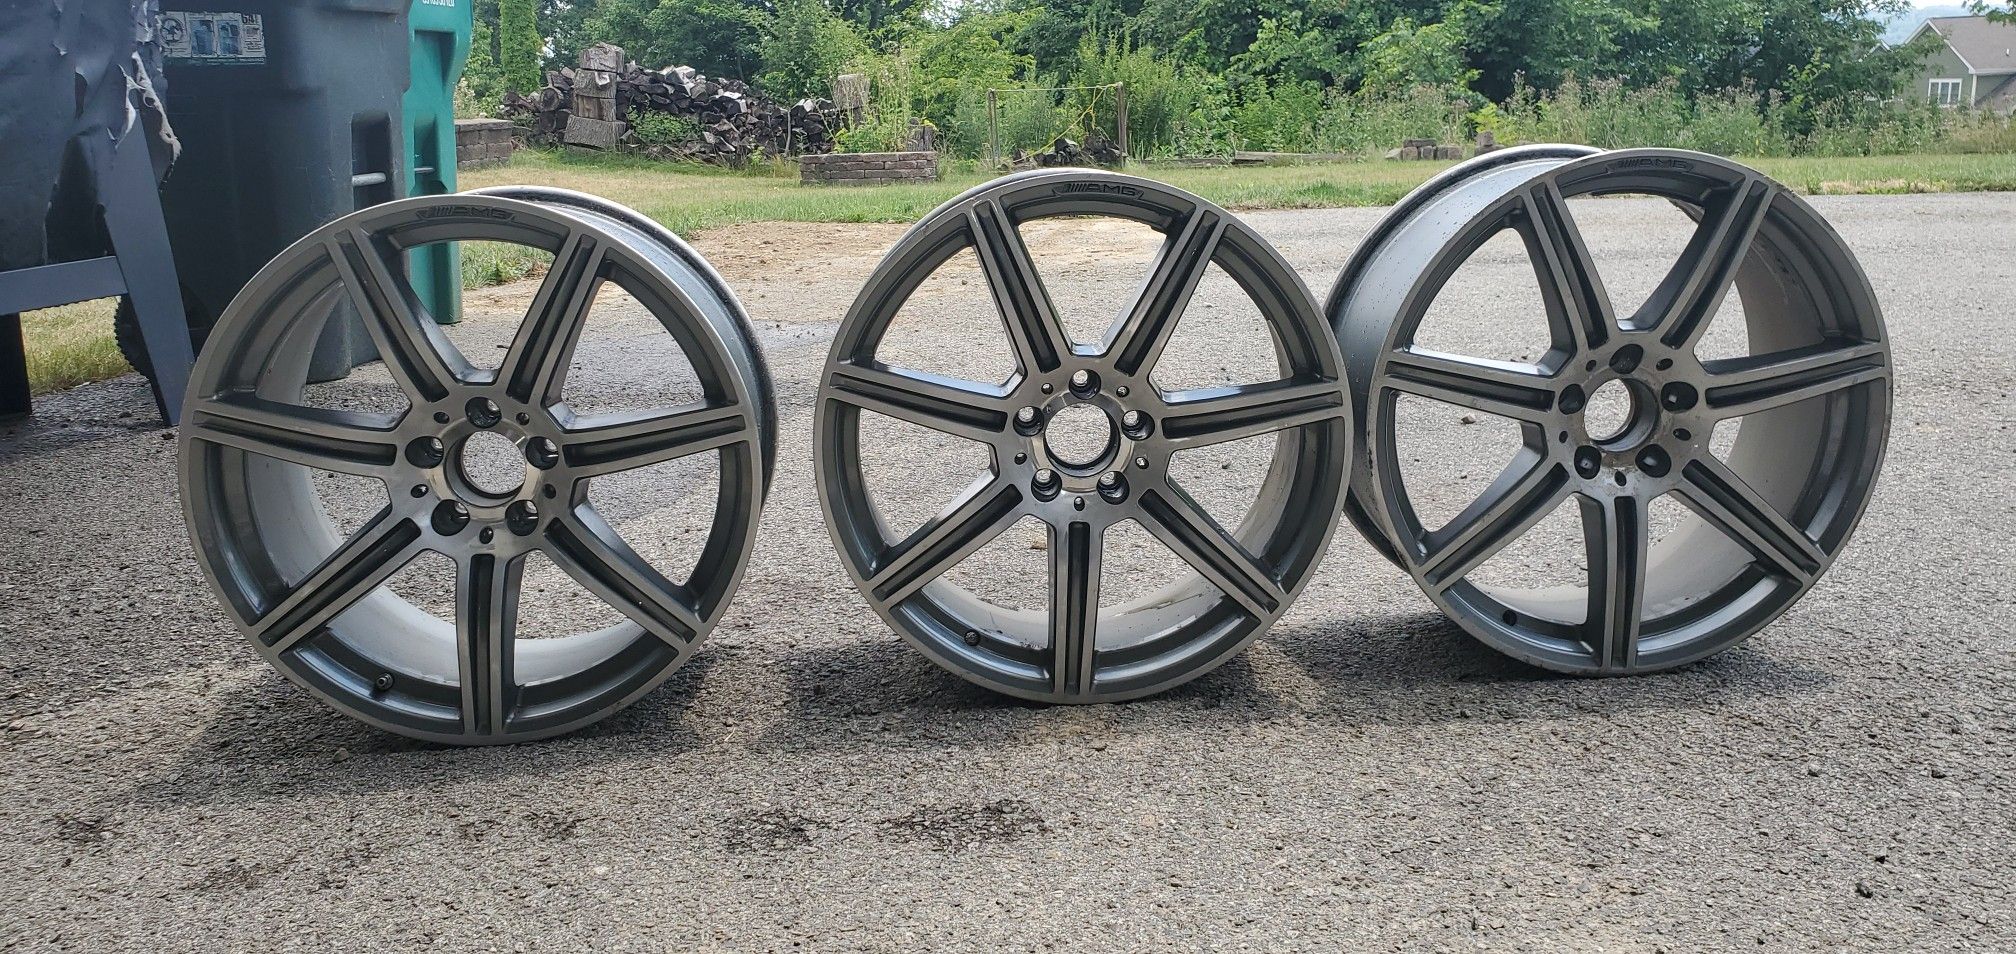 (3) 19 inch AMG Mercedes Rims/Wheels. (2) 19×8.5 and (1) 19×9.5. Fits S-Class and E-Class.